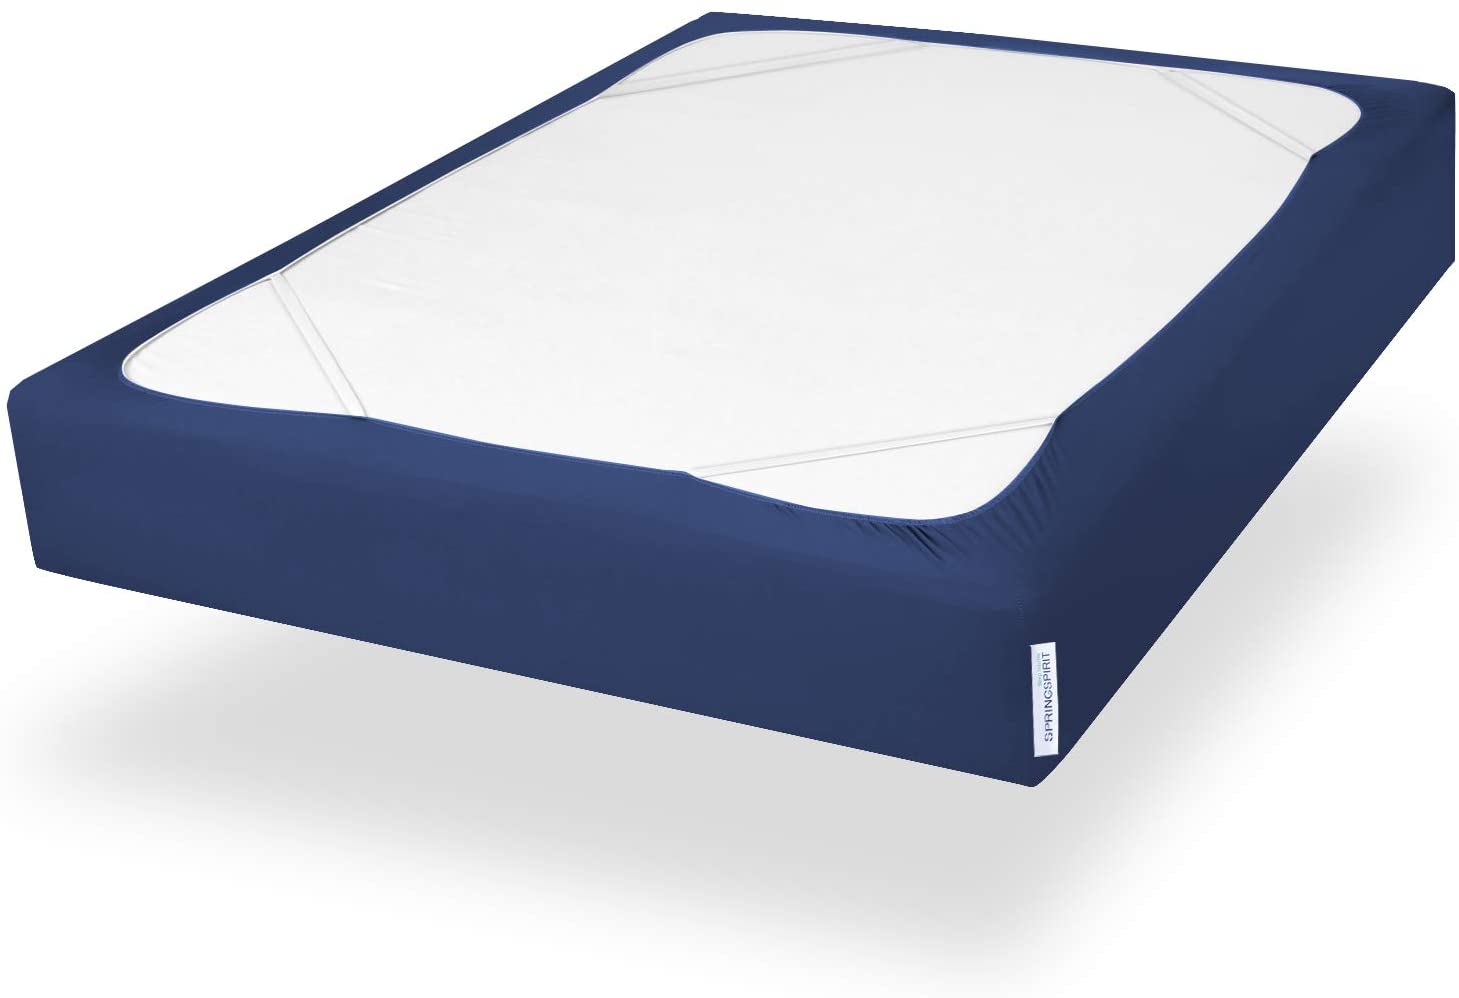 Box Spring Cover with Smooth and Elastic Woven Material, Wrinkle & Fading Resistant & Dustproof, Navy - Biloban Online Store